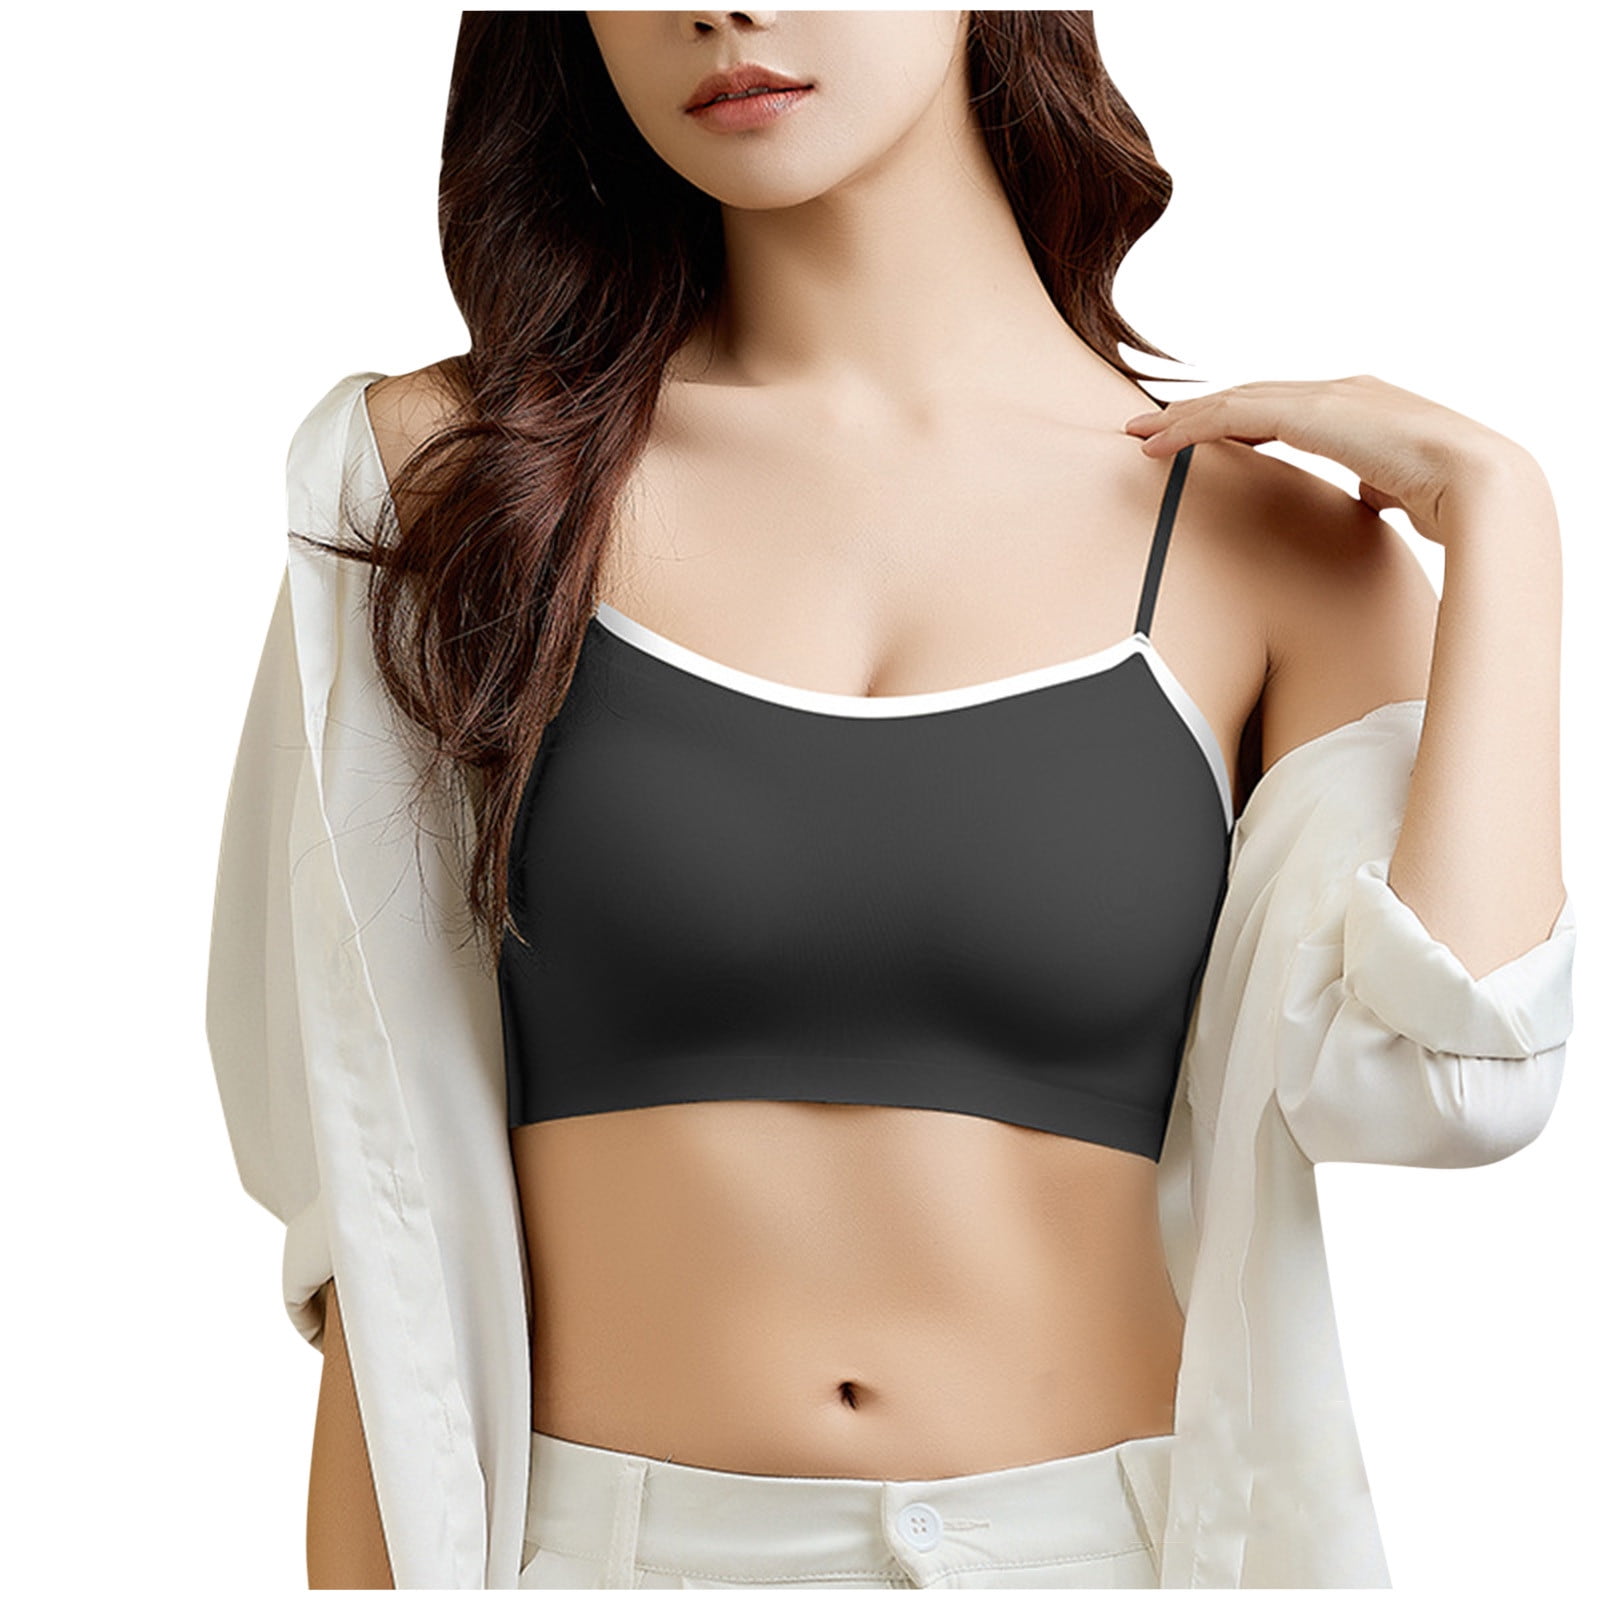 Mrat Clearance Front Closure Bras for Women Large Breasts Wireless with  Support and Lift Wireless Bras for Large Breasted Front Closure Plus Size Unlined  Bras with Underwire Women Sports Bras Black XL 